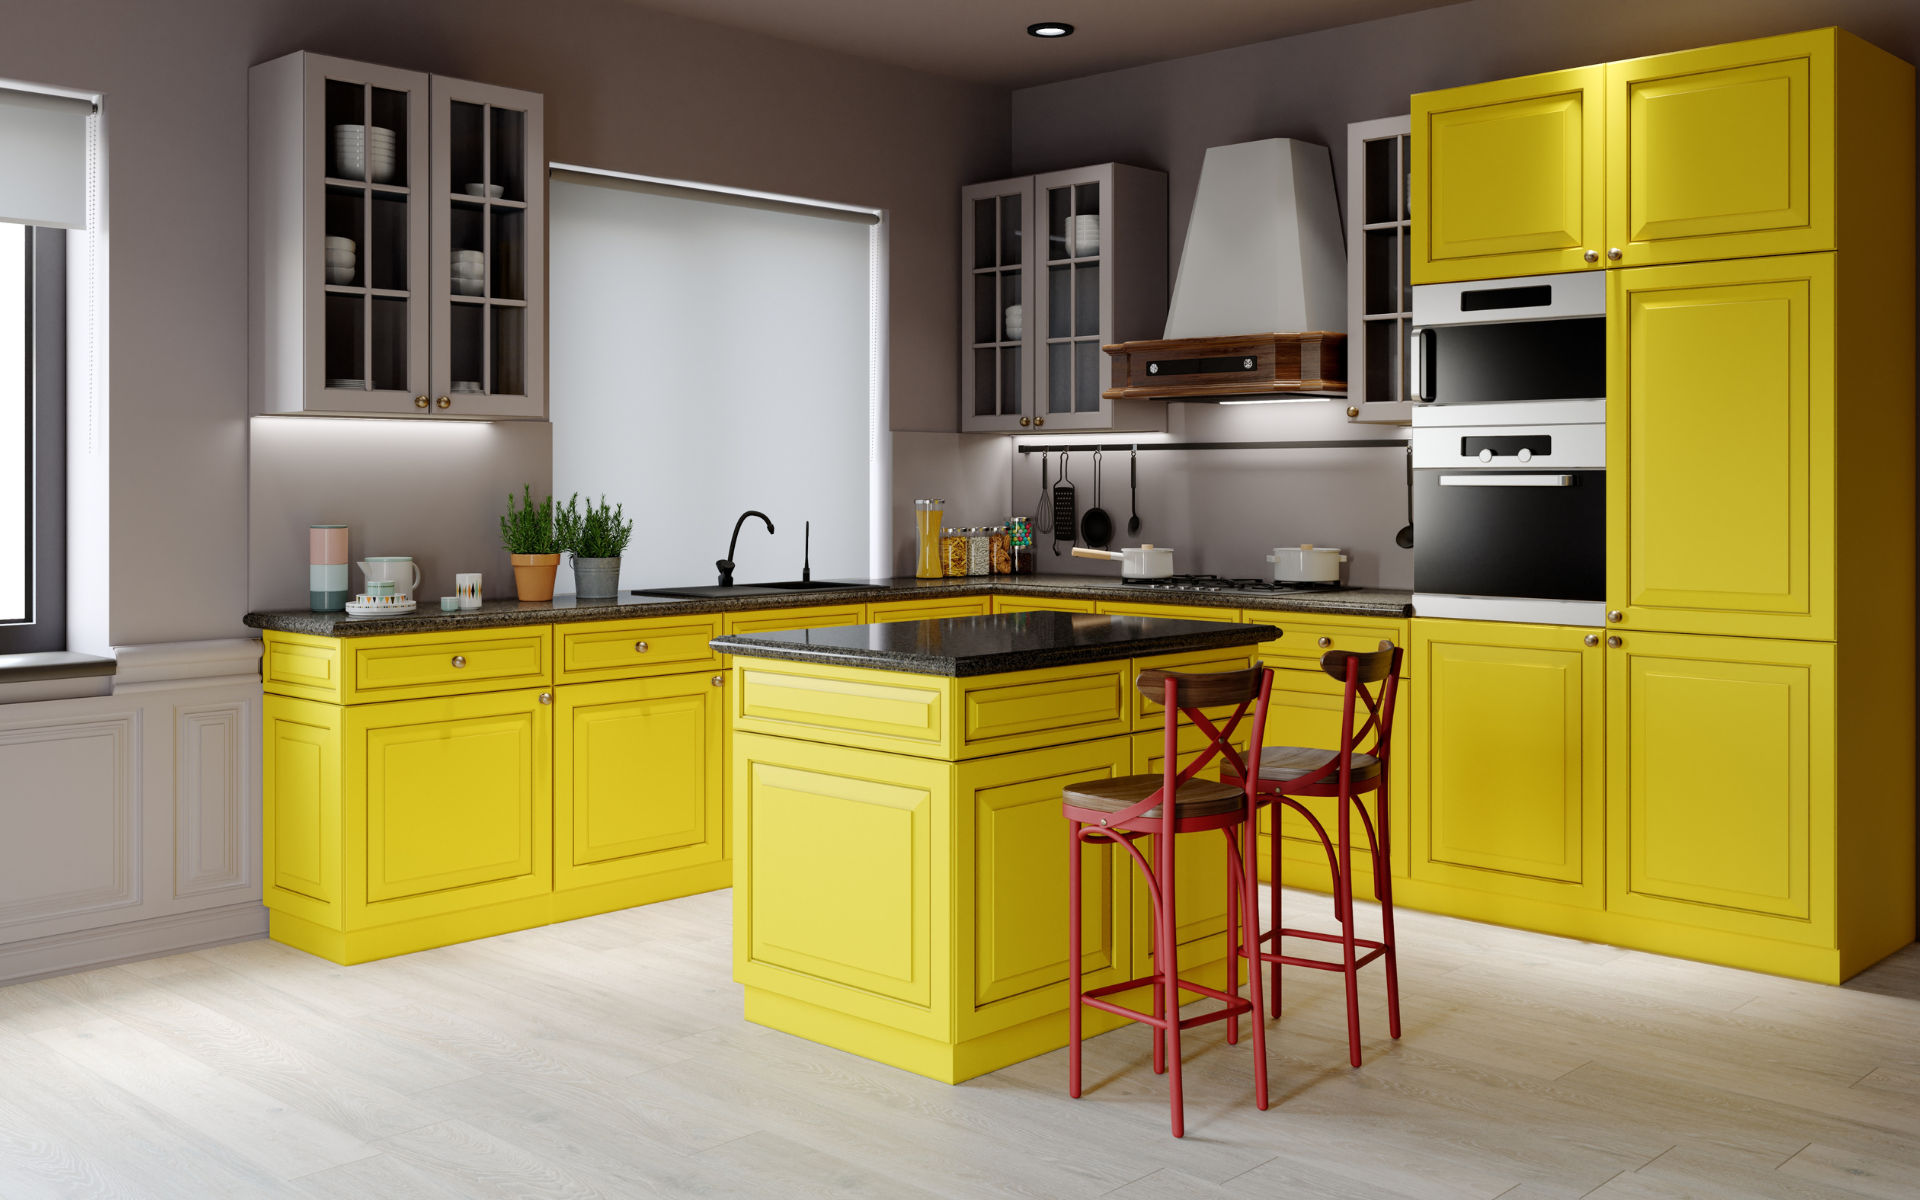 L type kitchen with yellow cabinets and black countertops